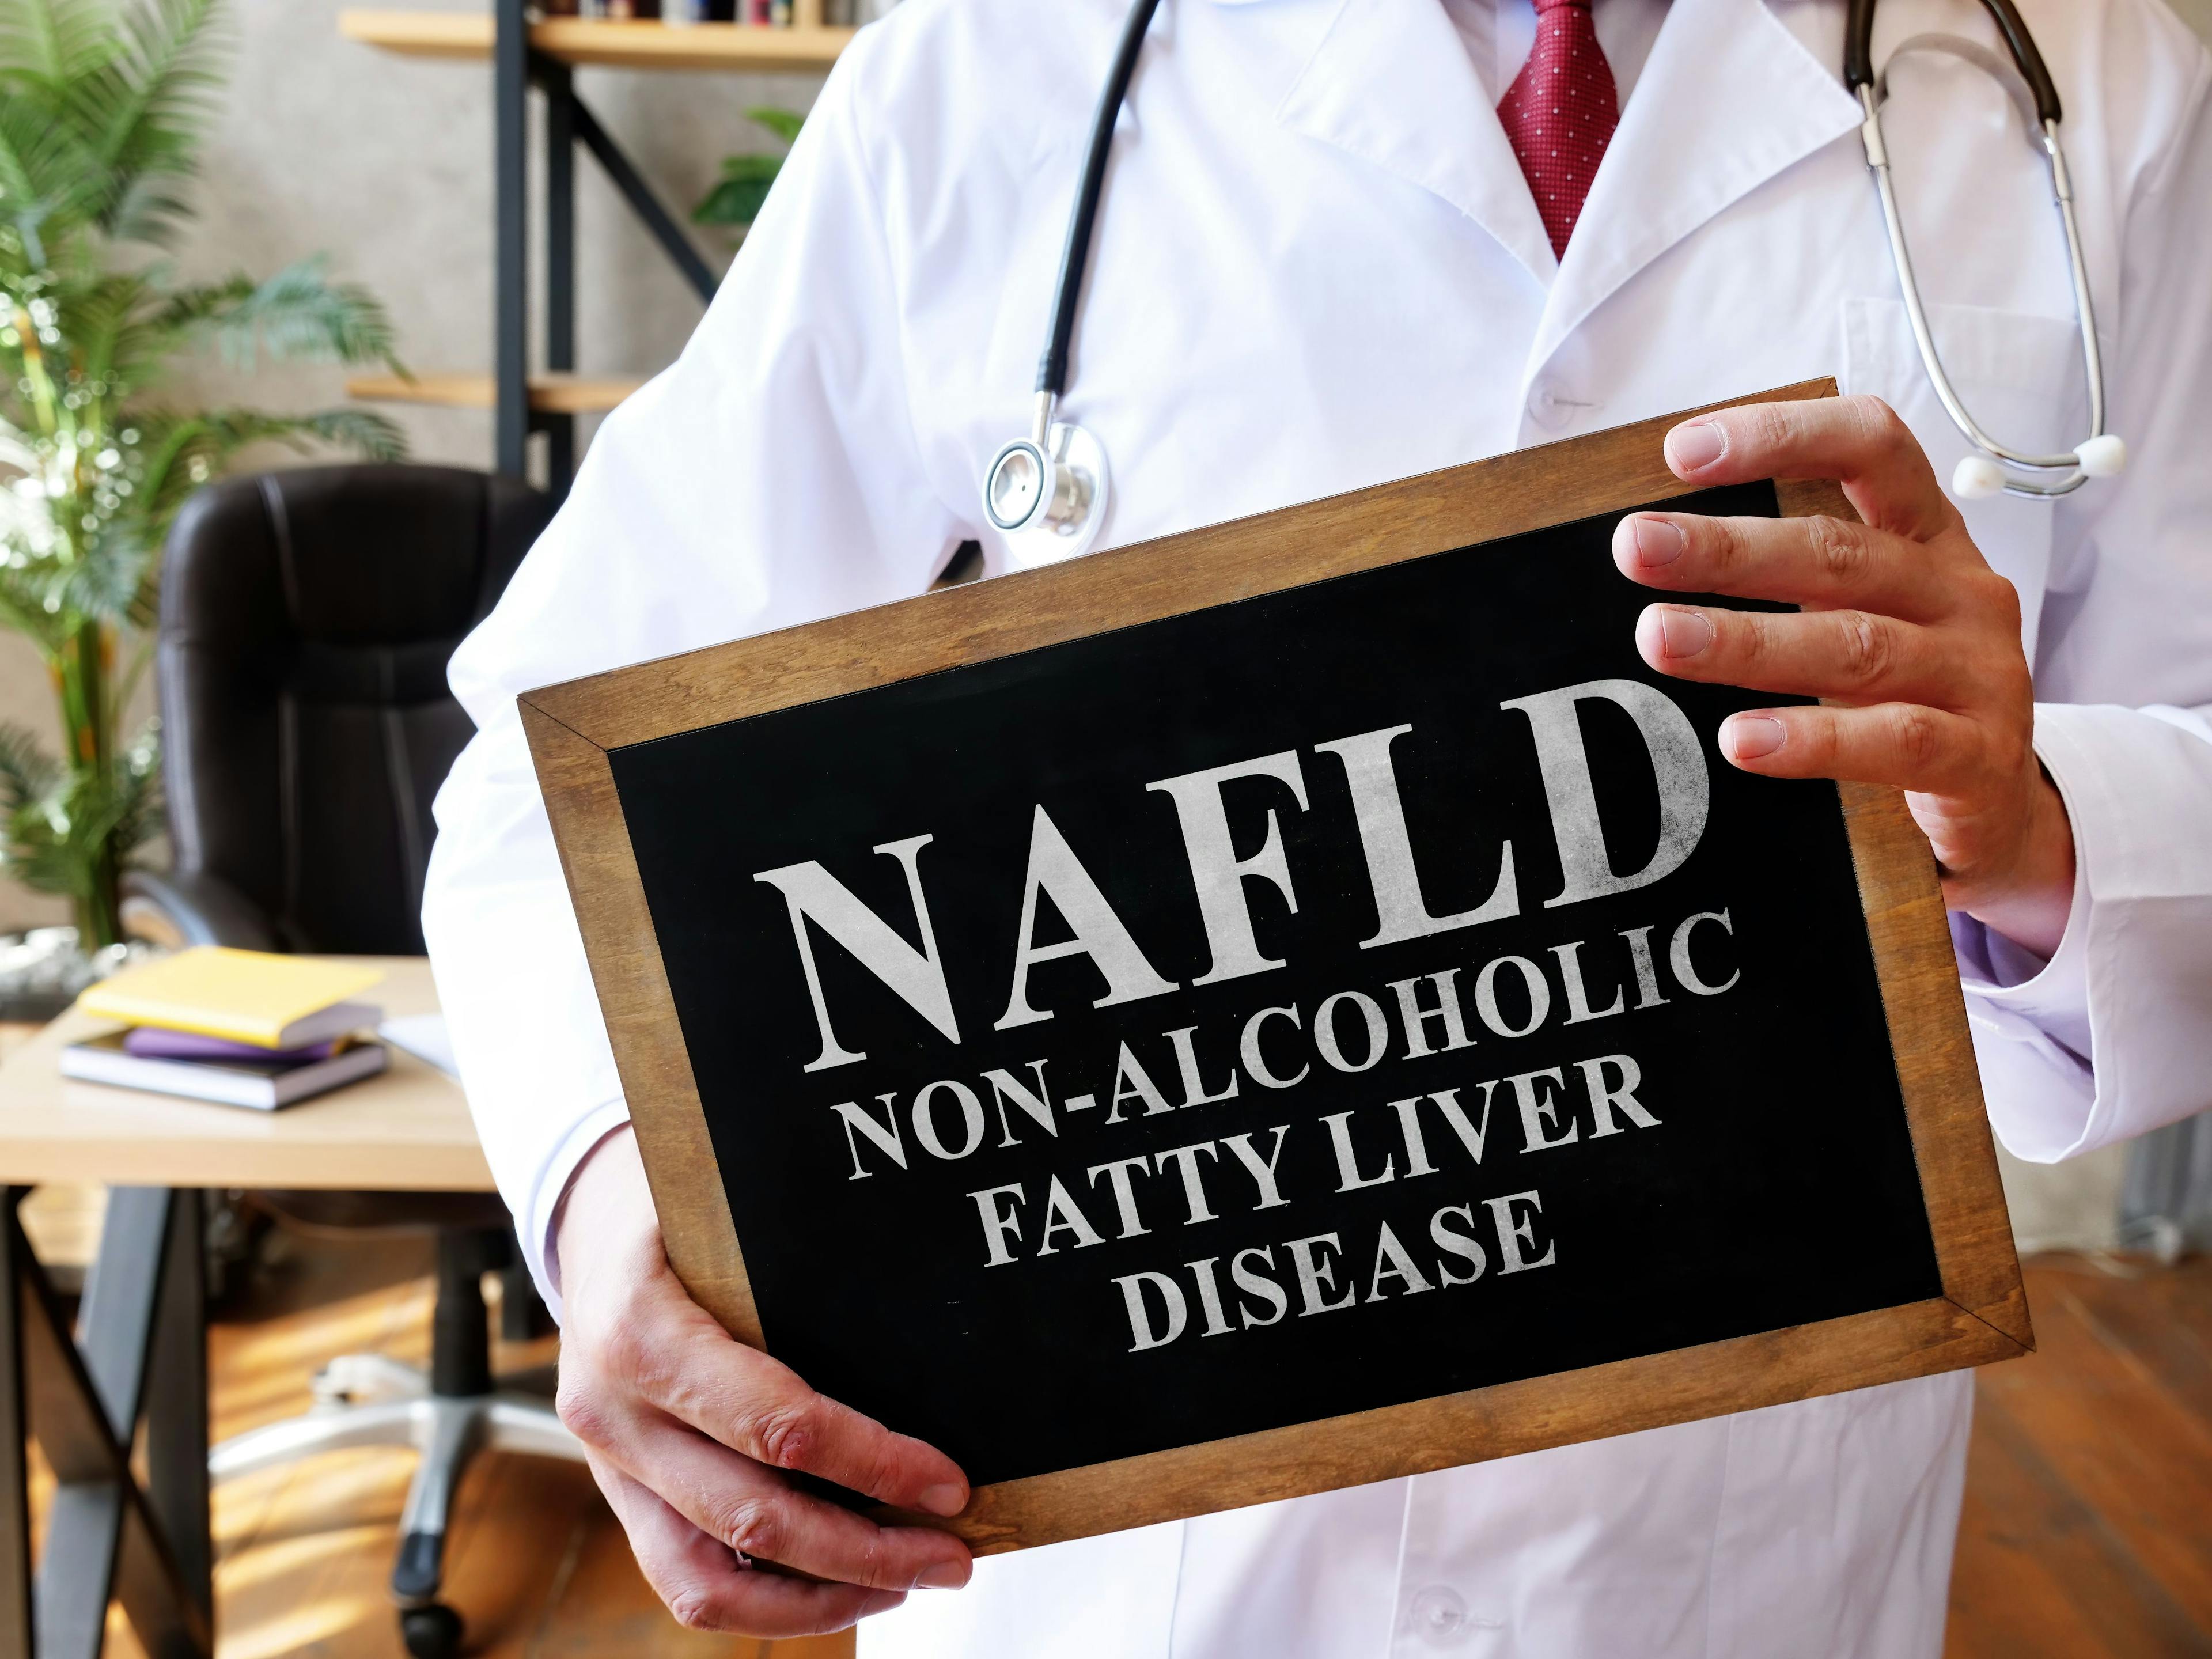 Researchers Say Results Argue for “Progression to Cirrhosis” Outcomes for Studies of NAFLD Treatments